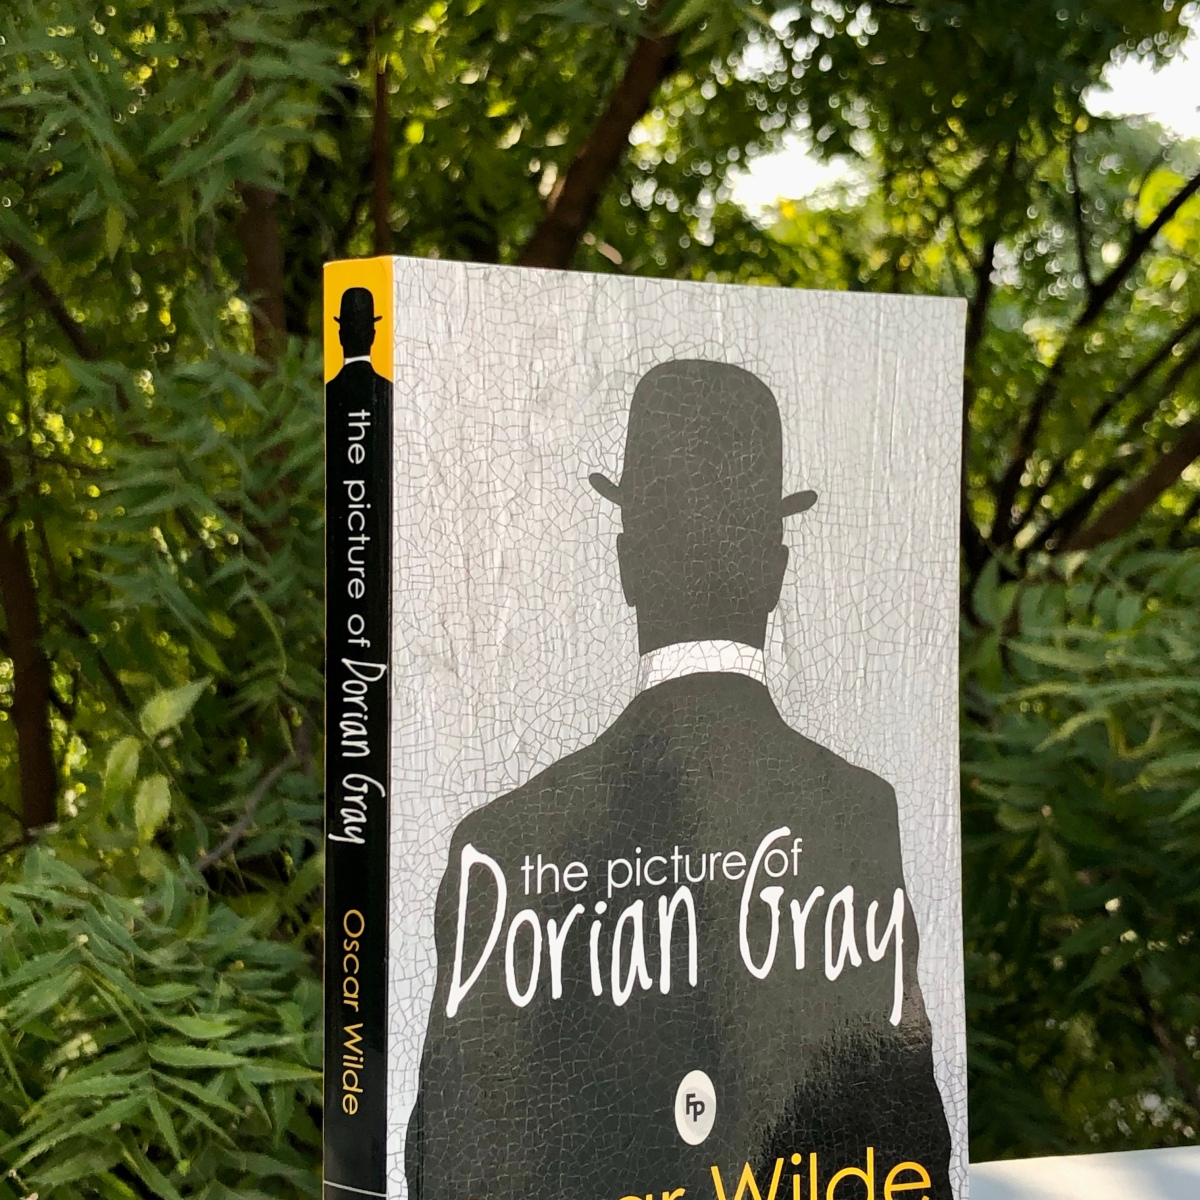 THE PICTURE OF DORIAN GRAY by Oscar Wilde